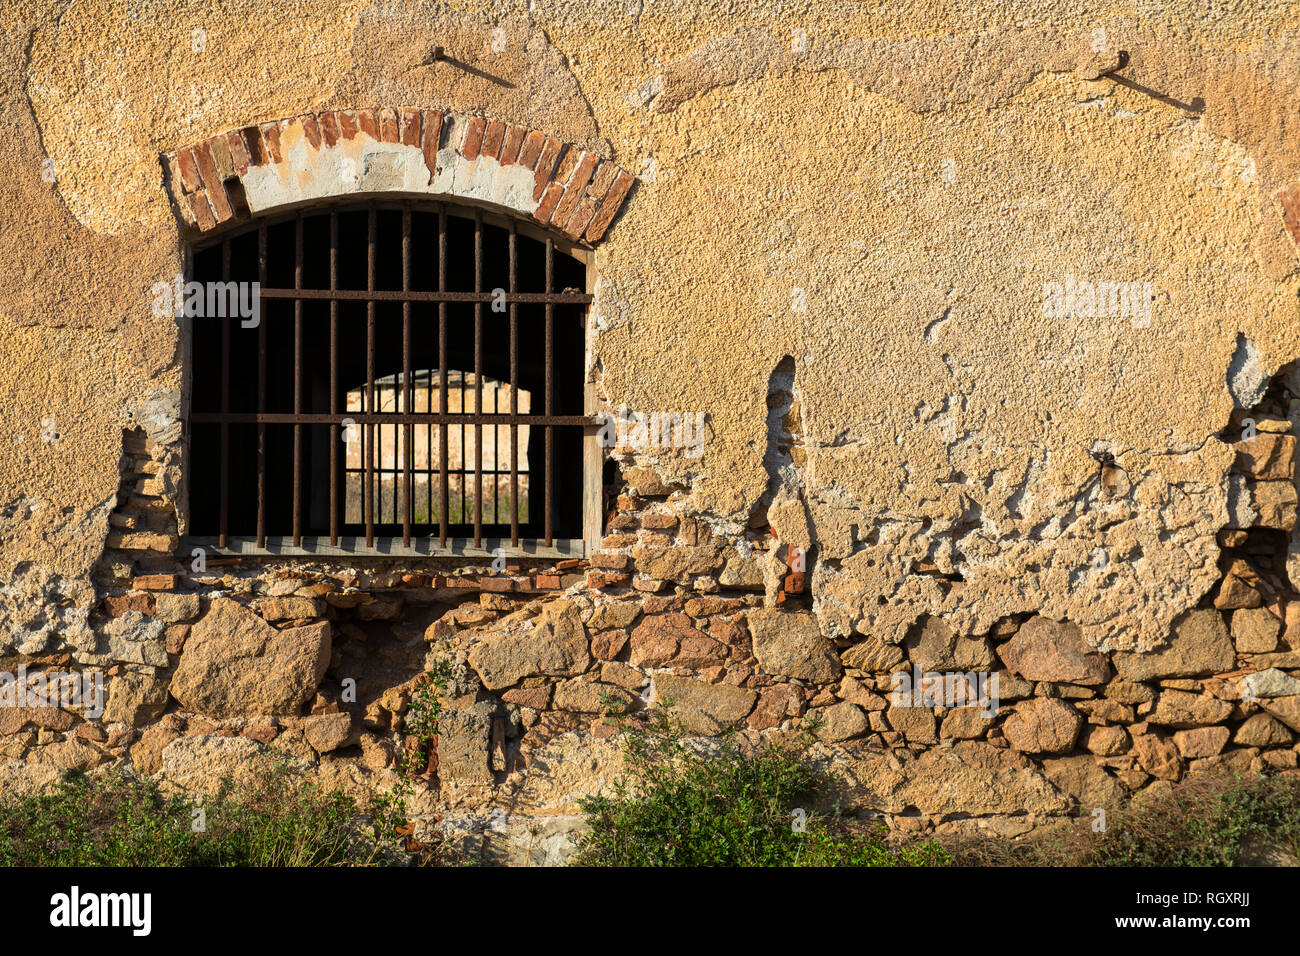 A window of an old building or jail with bars on the window frame, on Caprera Island, Sardinia, Italy. Stock Photo